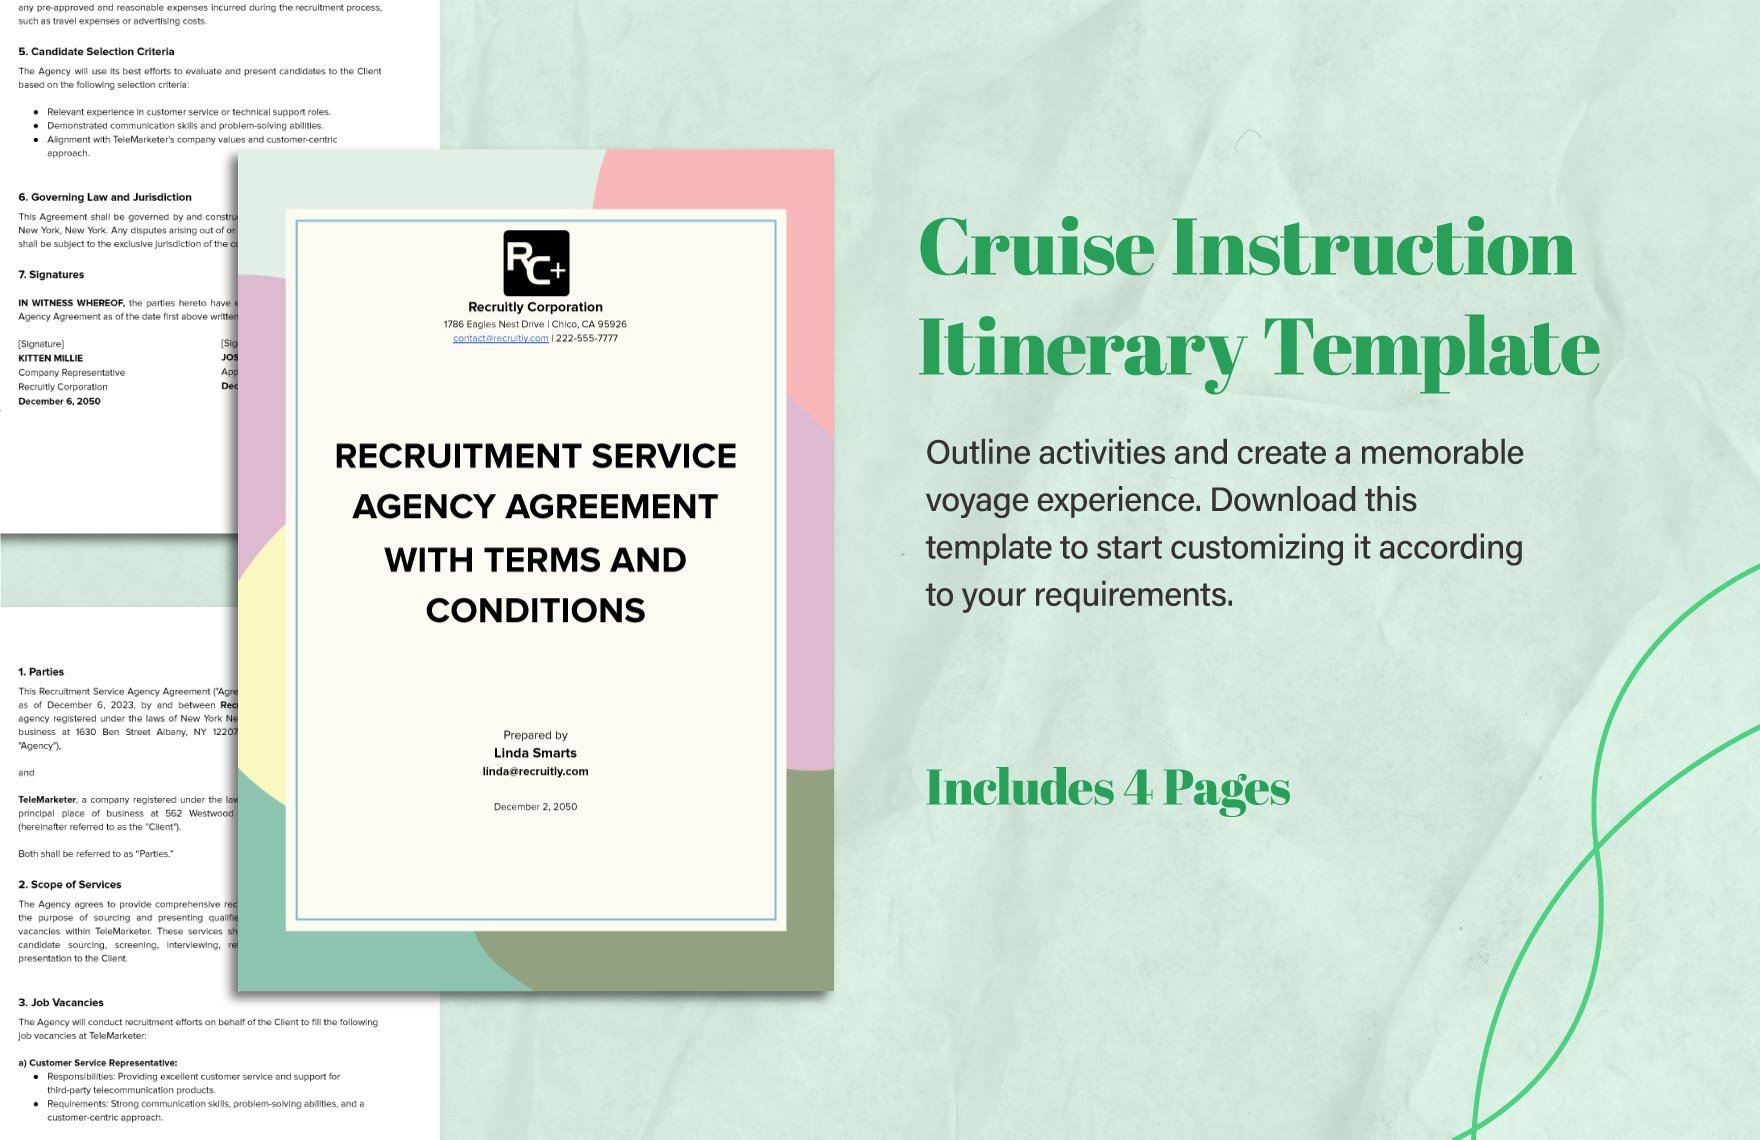 Recruitment Service Agency Agreement with Terms and Conditions